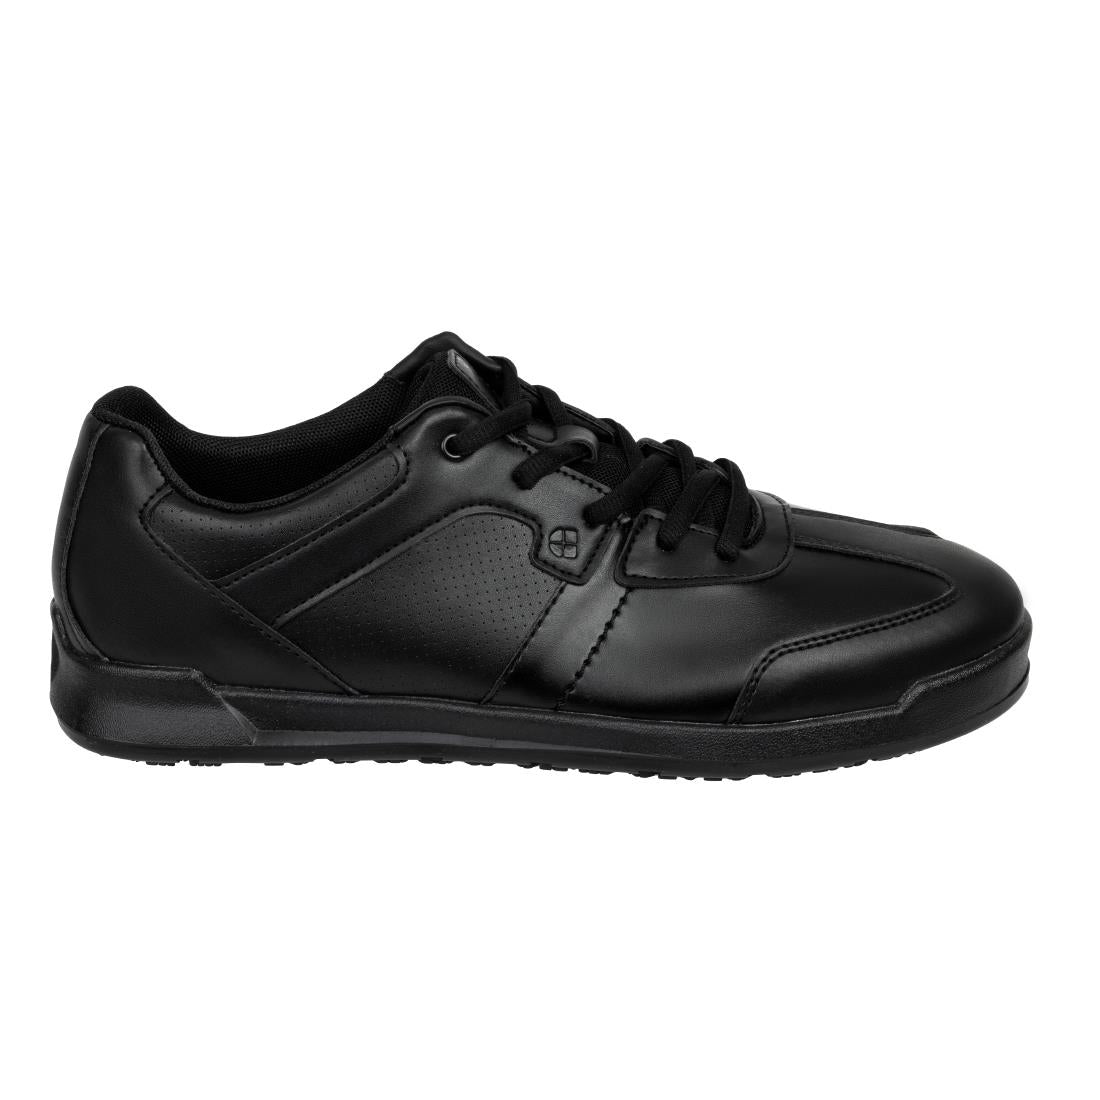 BB585-41 Shoes for Crews Freestyle Trainers Black Size 41